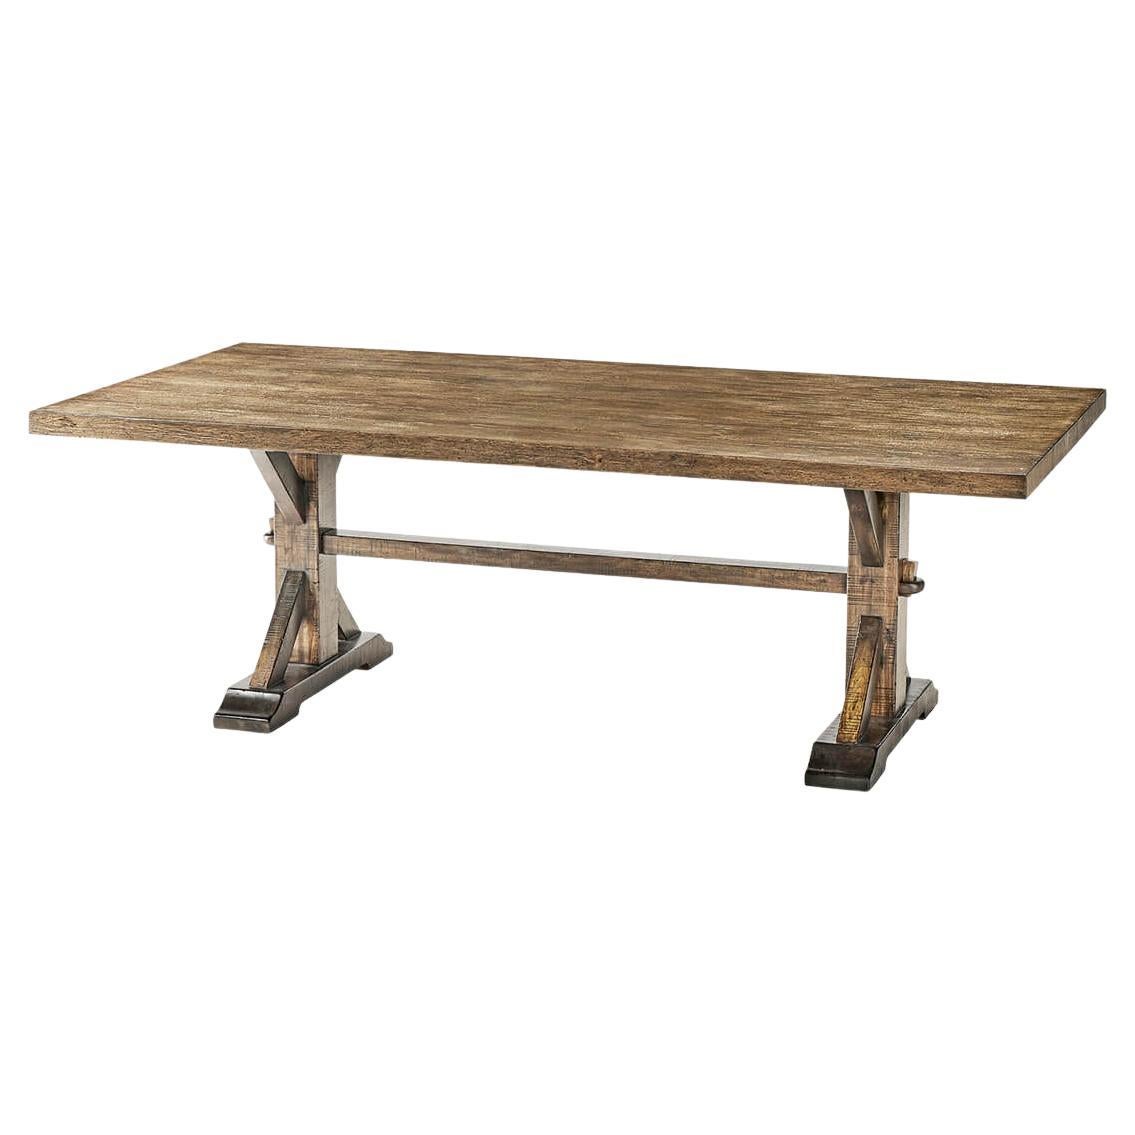 Rustic Country Dining Table, Medium Drift For Sale